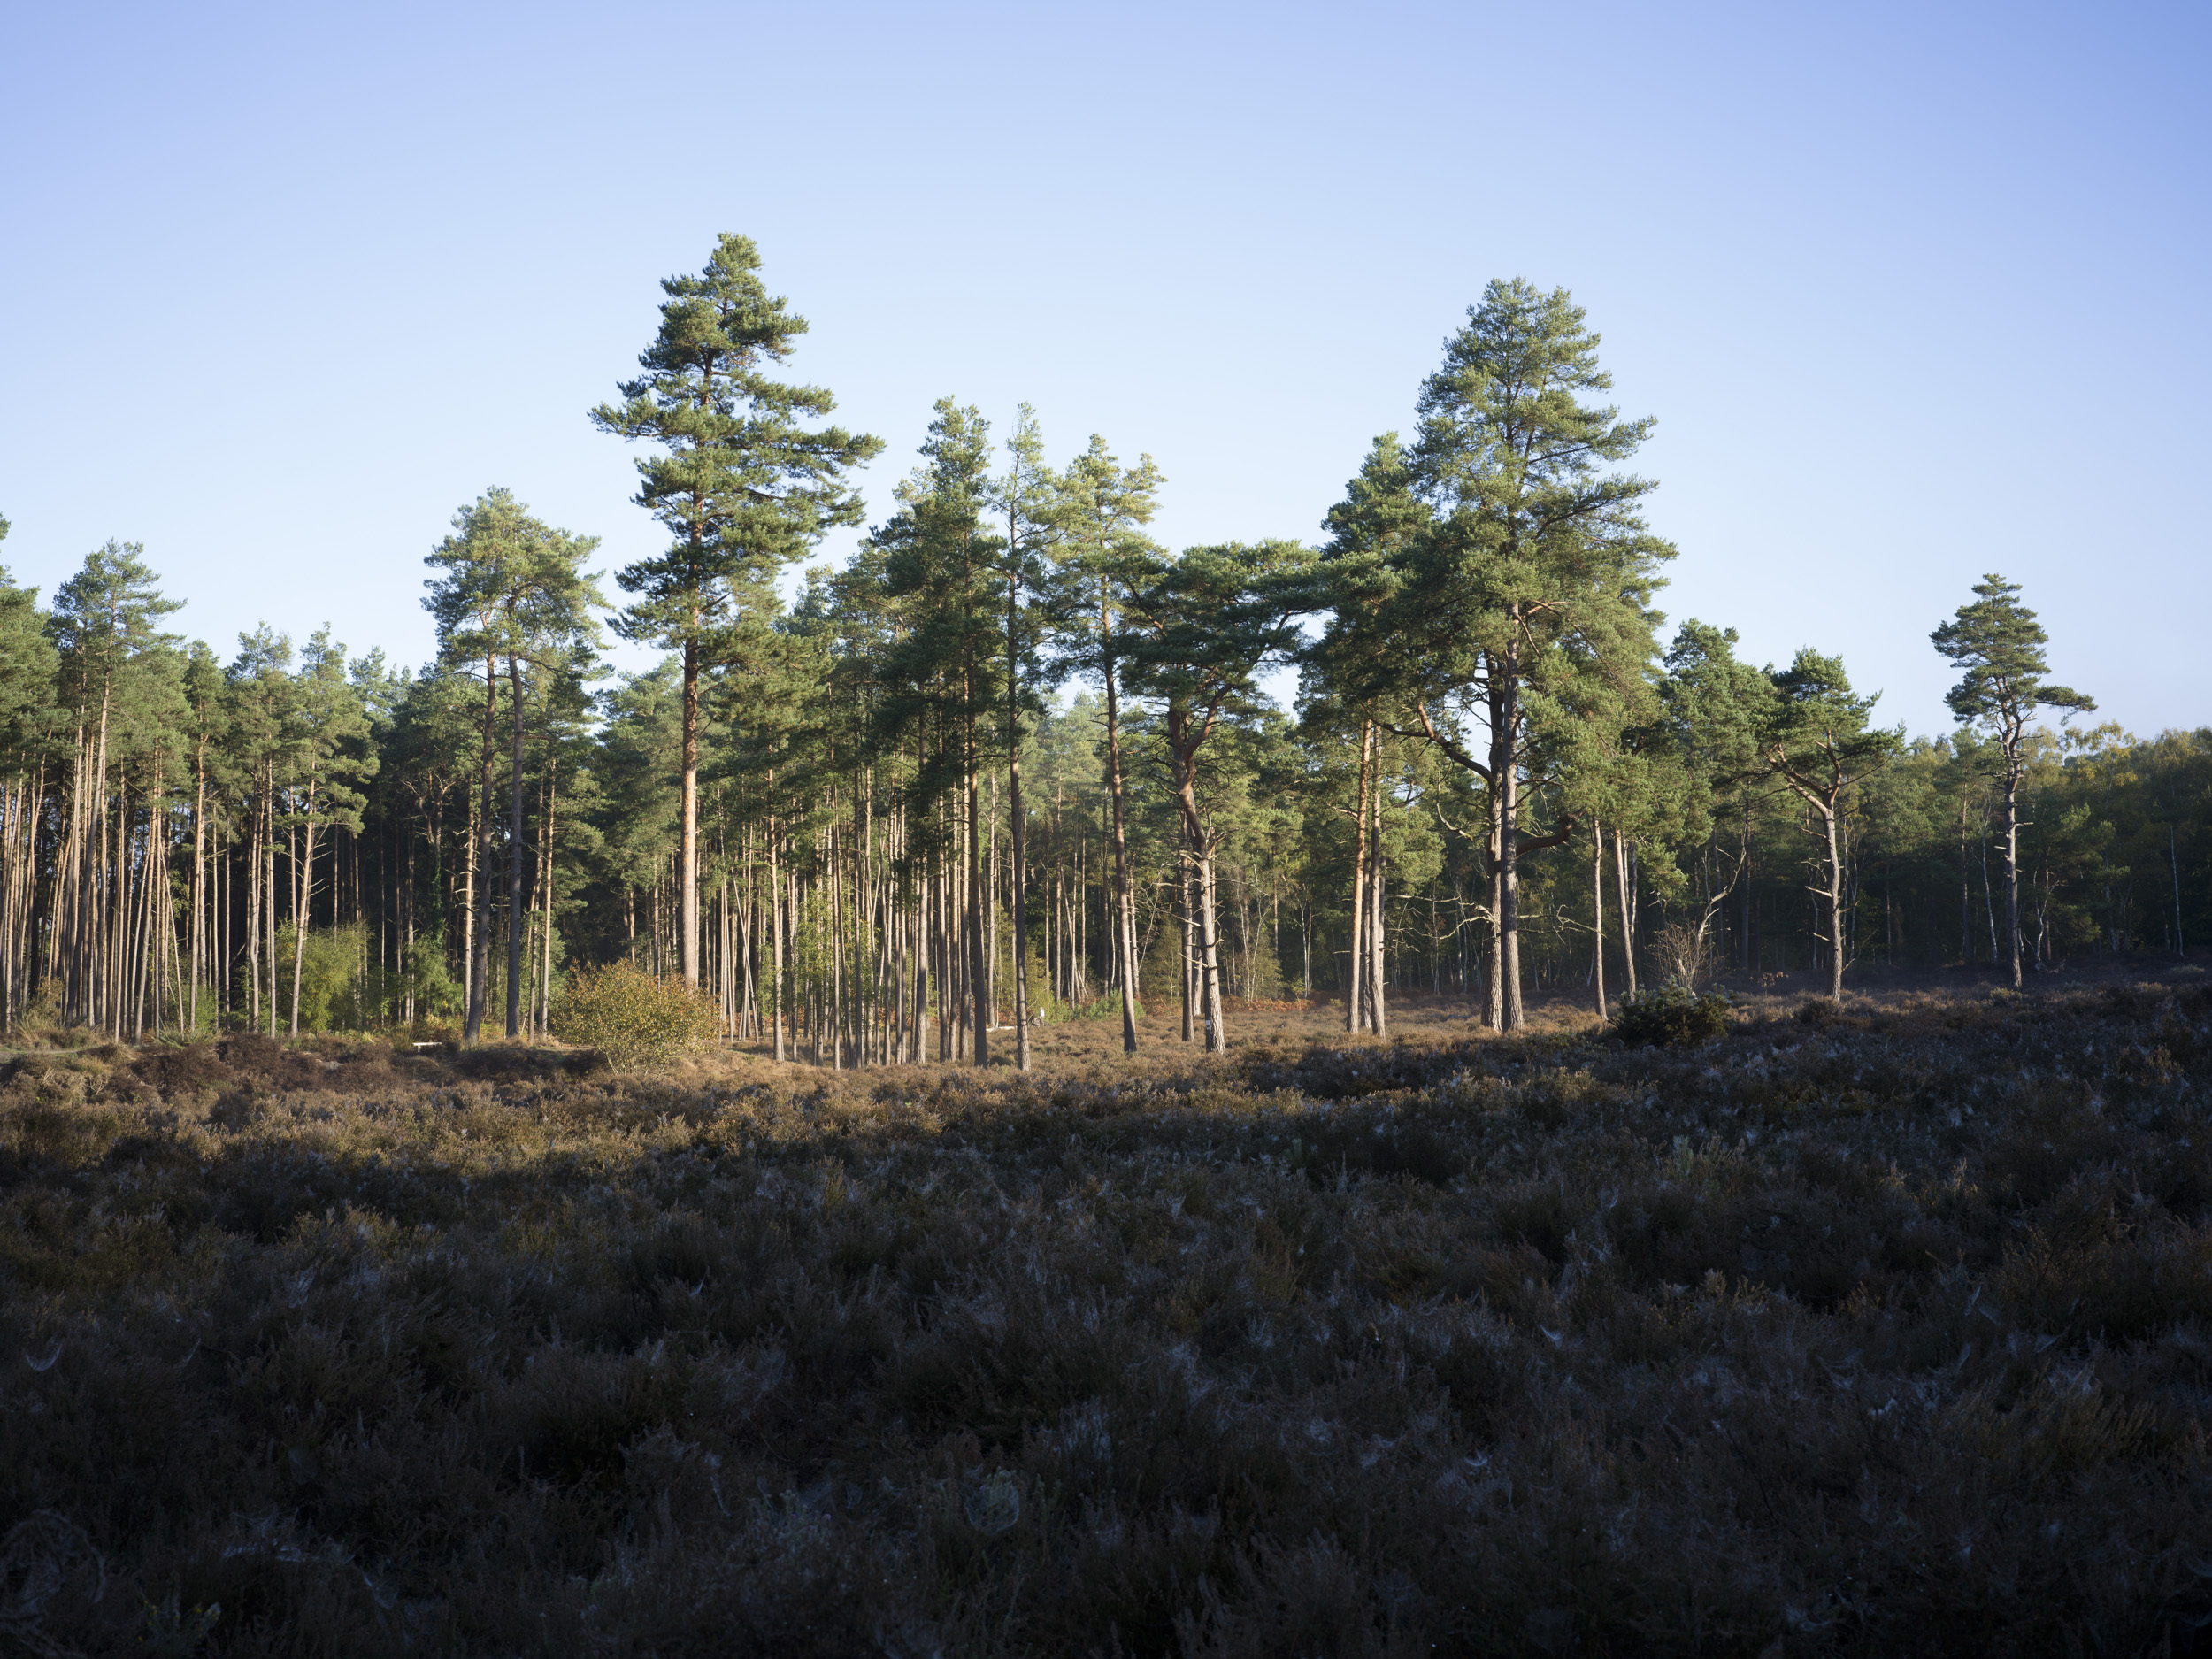 Sample image taken with the Hasselblad X2D 100C of a clearing and wide forest vista